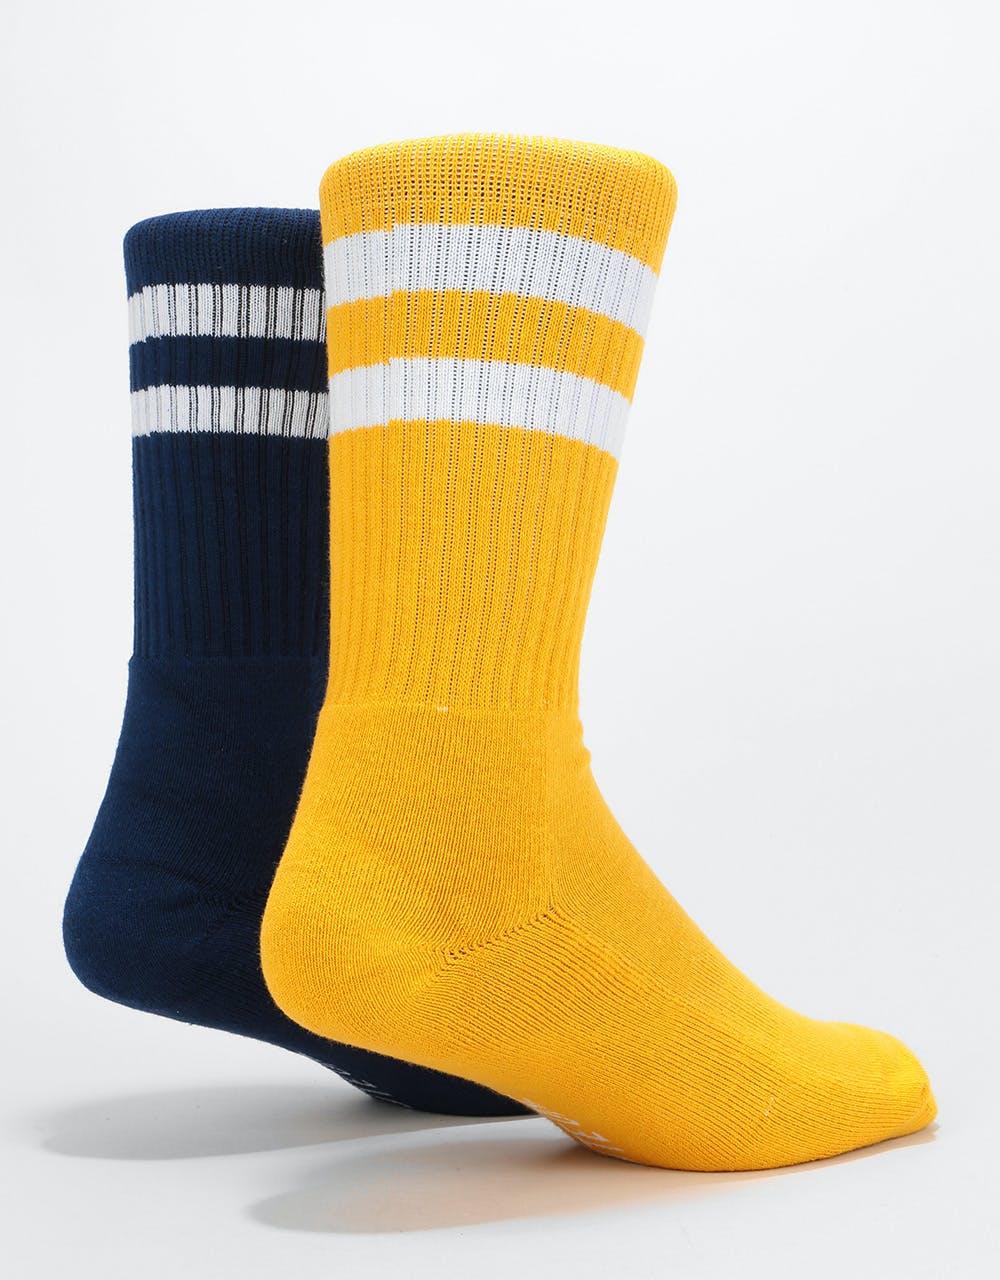 Route One Classic Crew Socks 2 Pack - Mustard/Navy